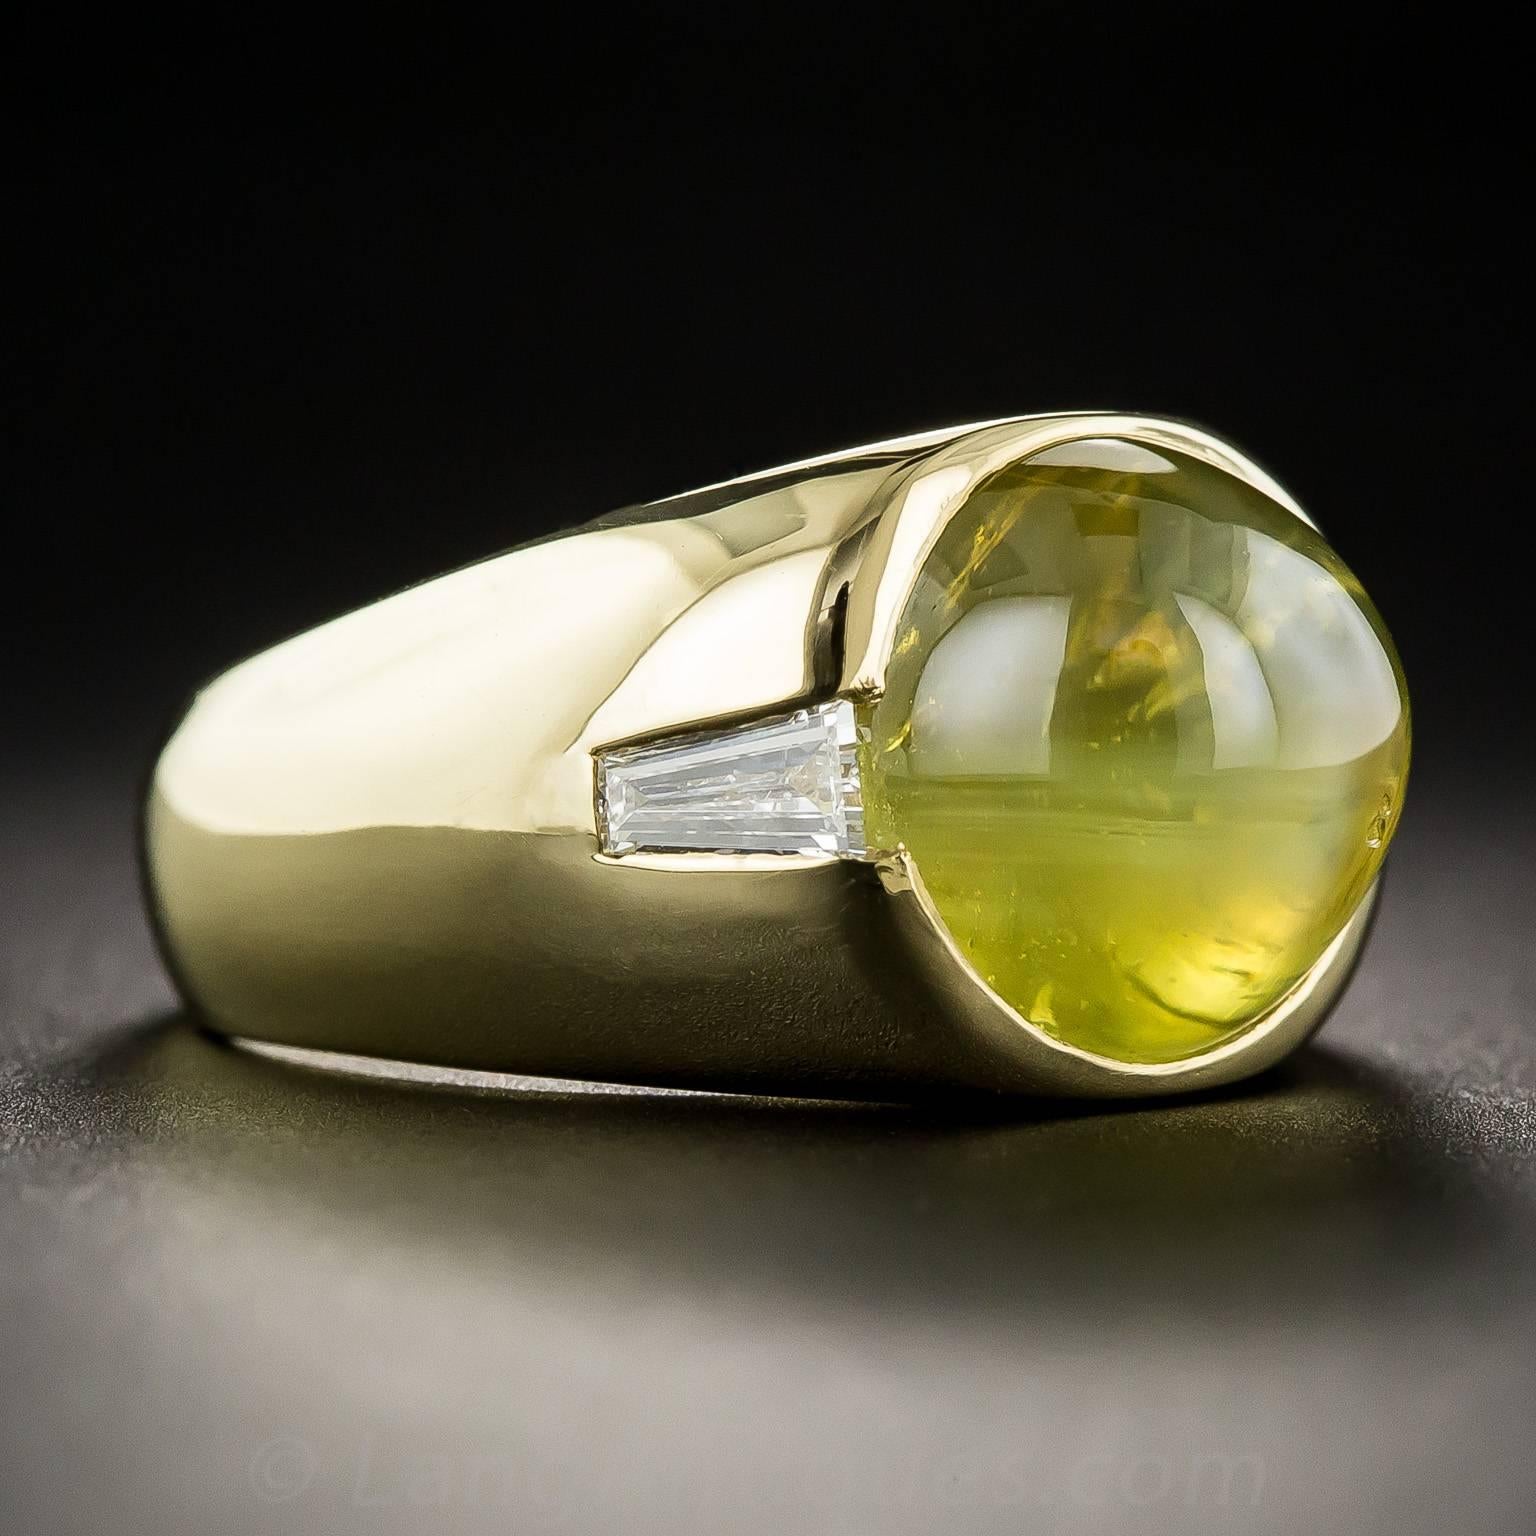 10 Carat Cat's Eye Chrysoberyl and Diamond Gent's Ring In Good Condition For Sale In San Francisco, CA